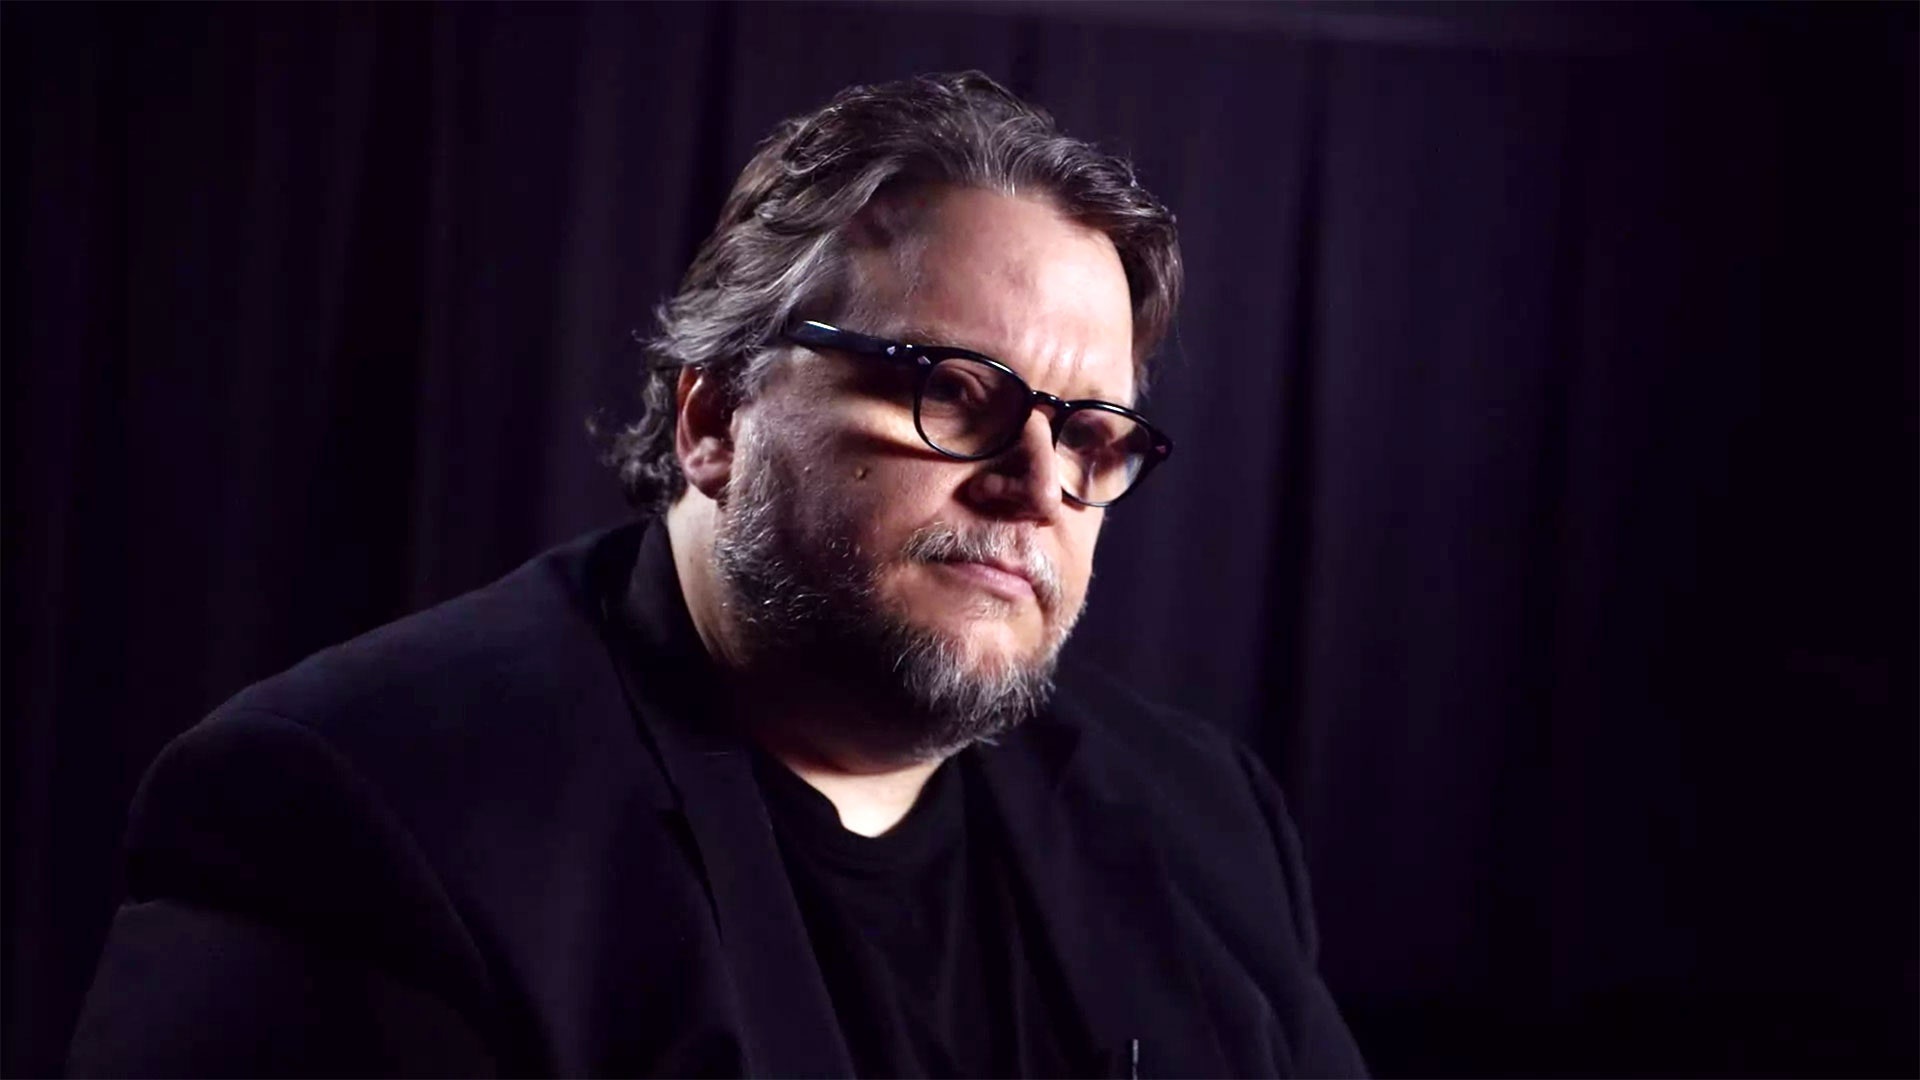 Guillermo del Toro, Coen brothers interviews, Wired, Movies, 1920x1080 Full HD Desktop